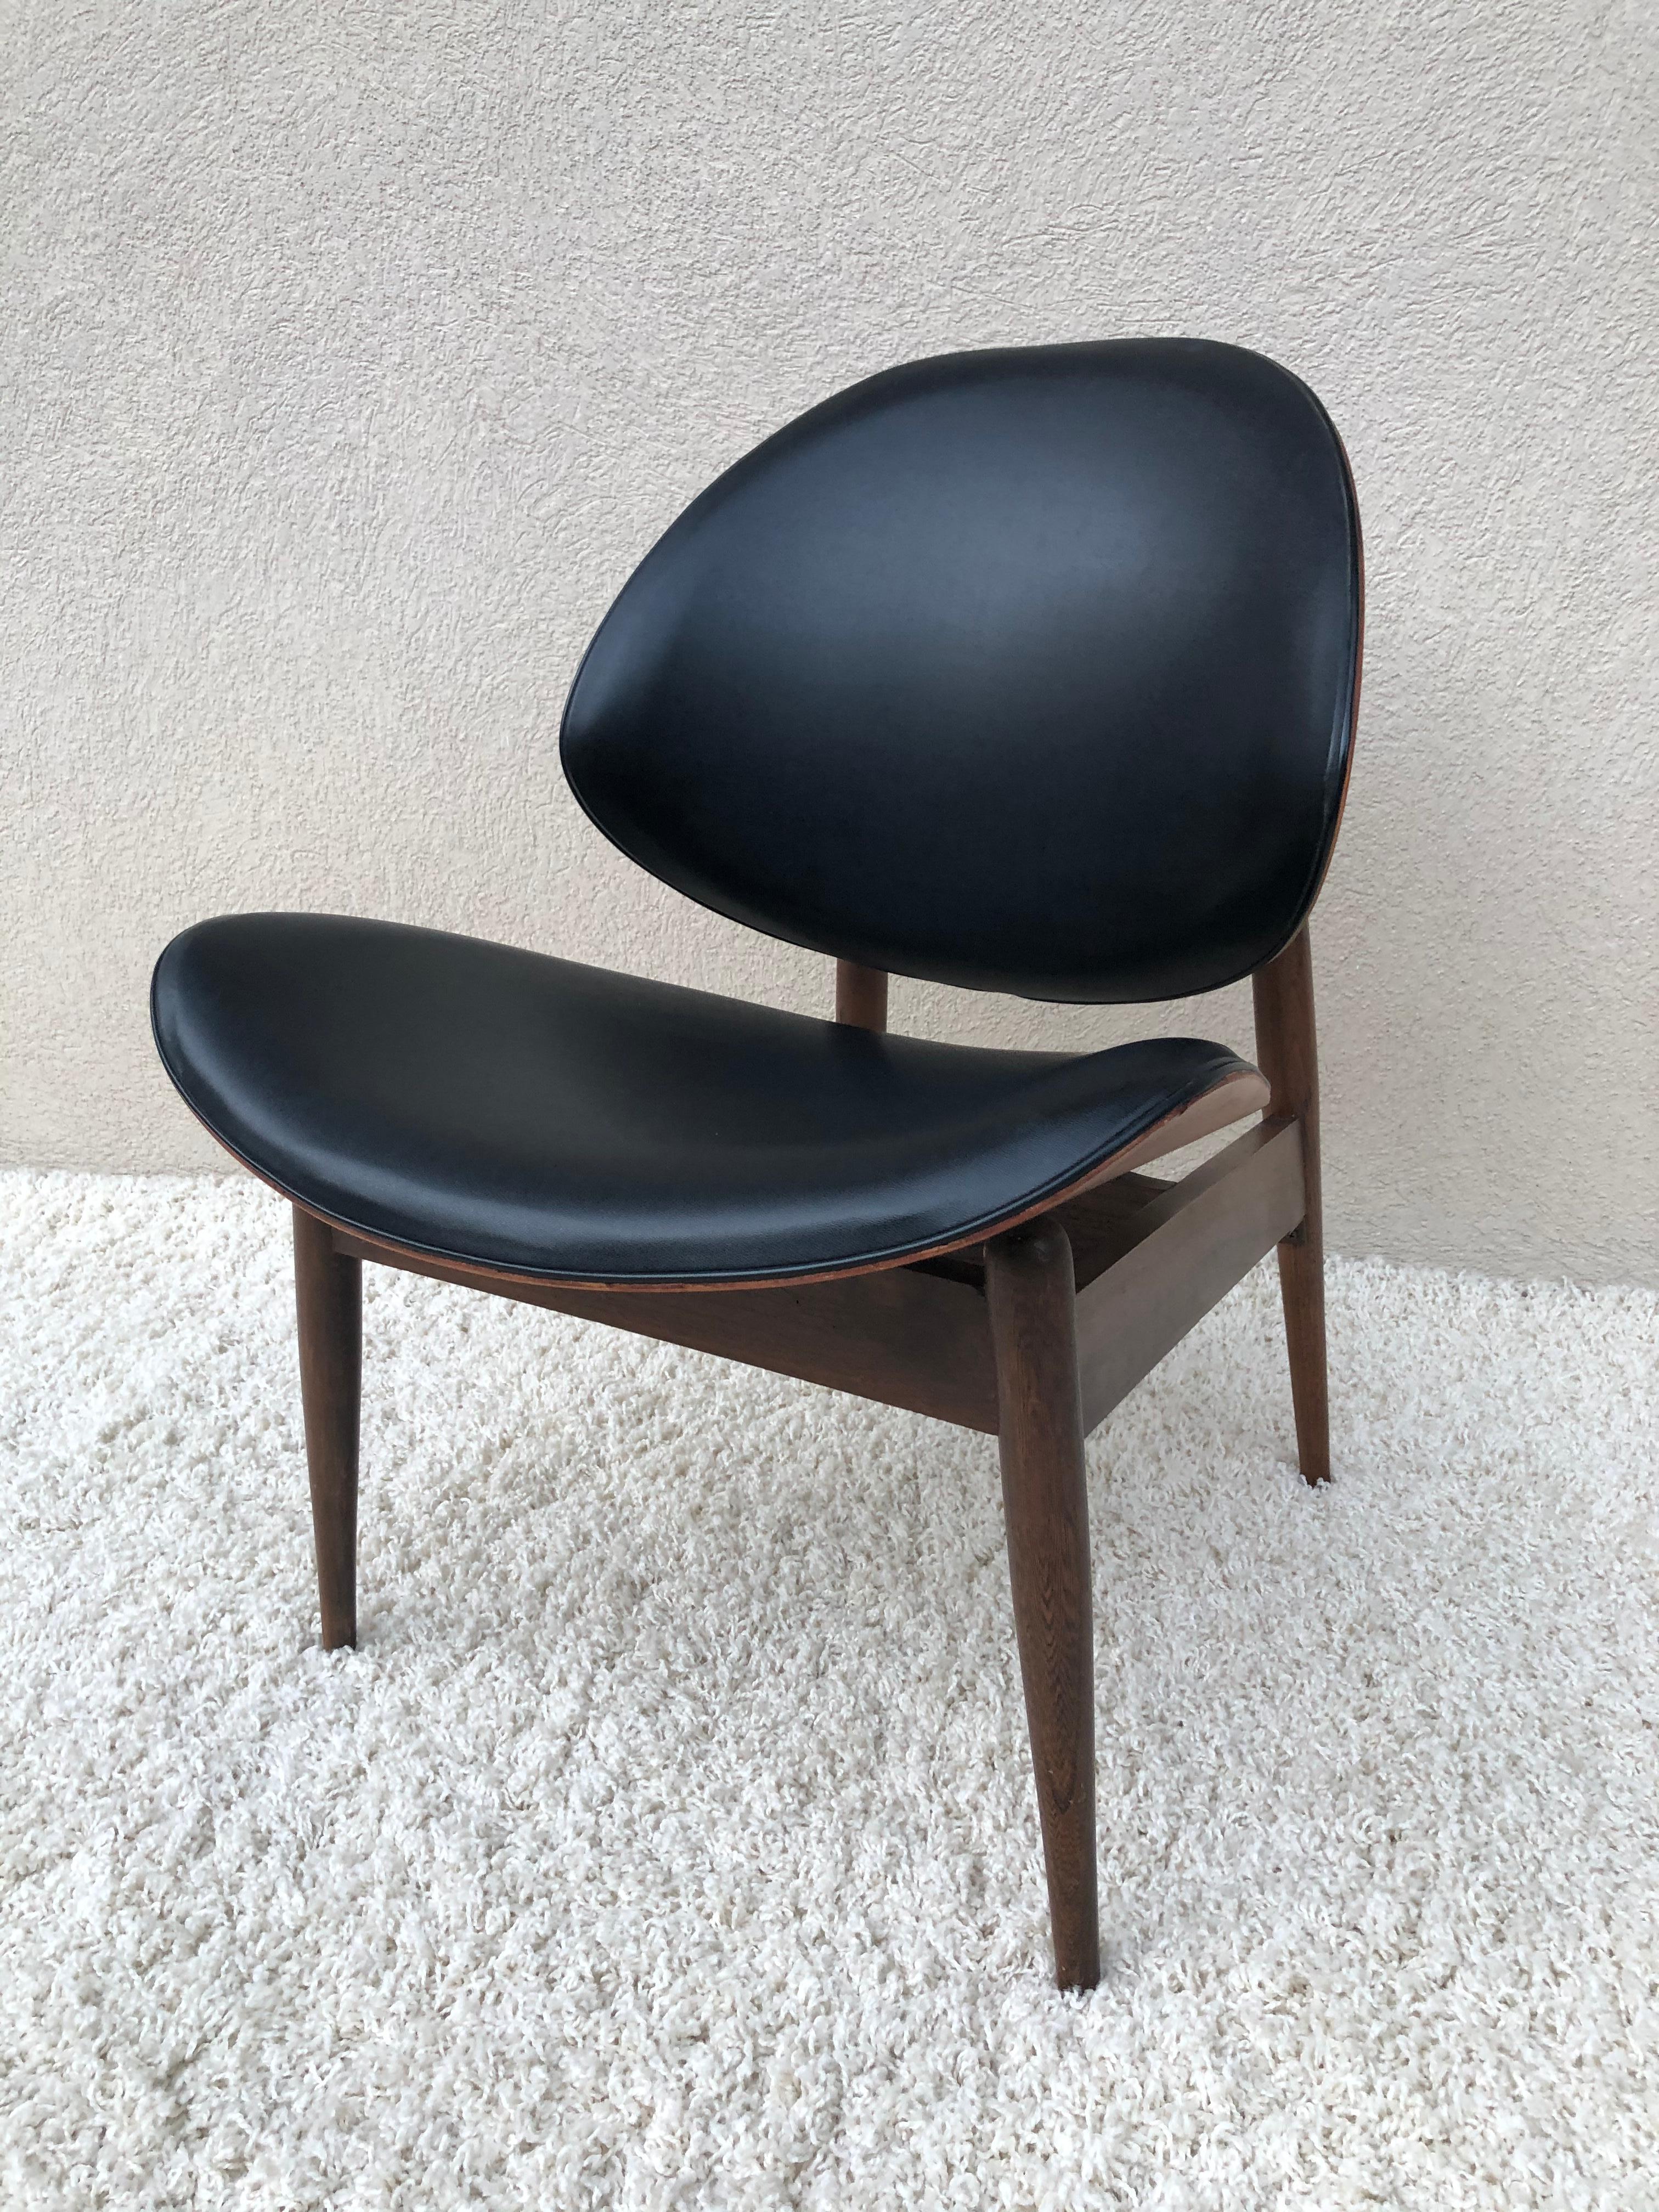 Finn Juhl style Frank and son midcentury bentwood shell black Naugahyde
Walnut chair, label to bottom in all original very good condition.